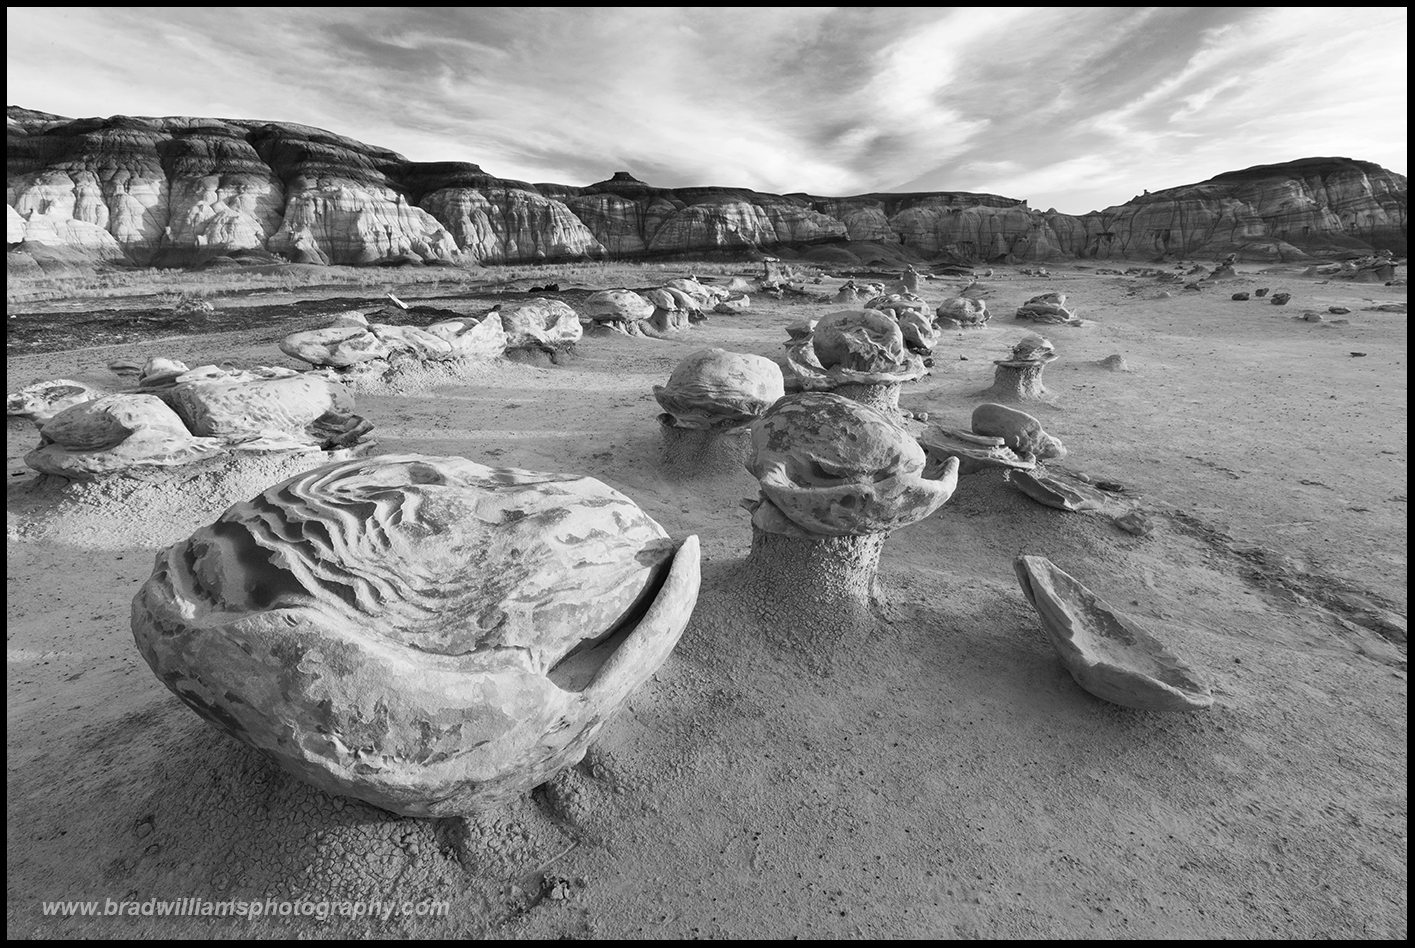 One of the many unusual rock&nbsp;formations in the Bisti Badlands in northern New Mexico.